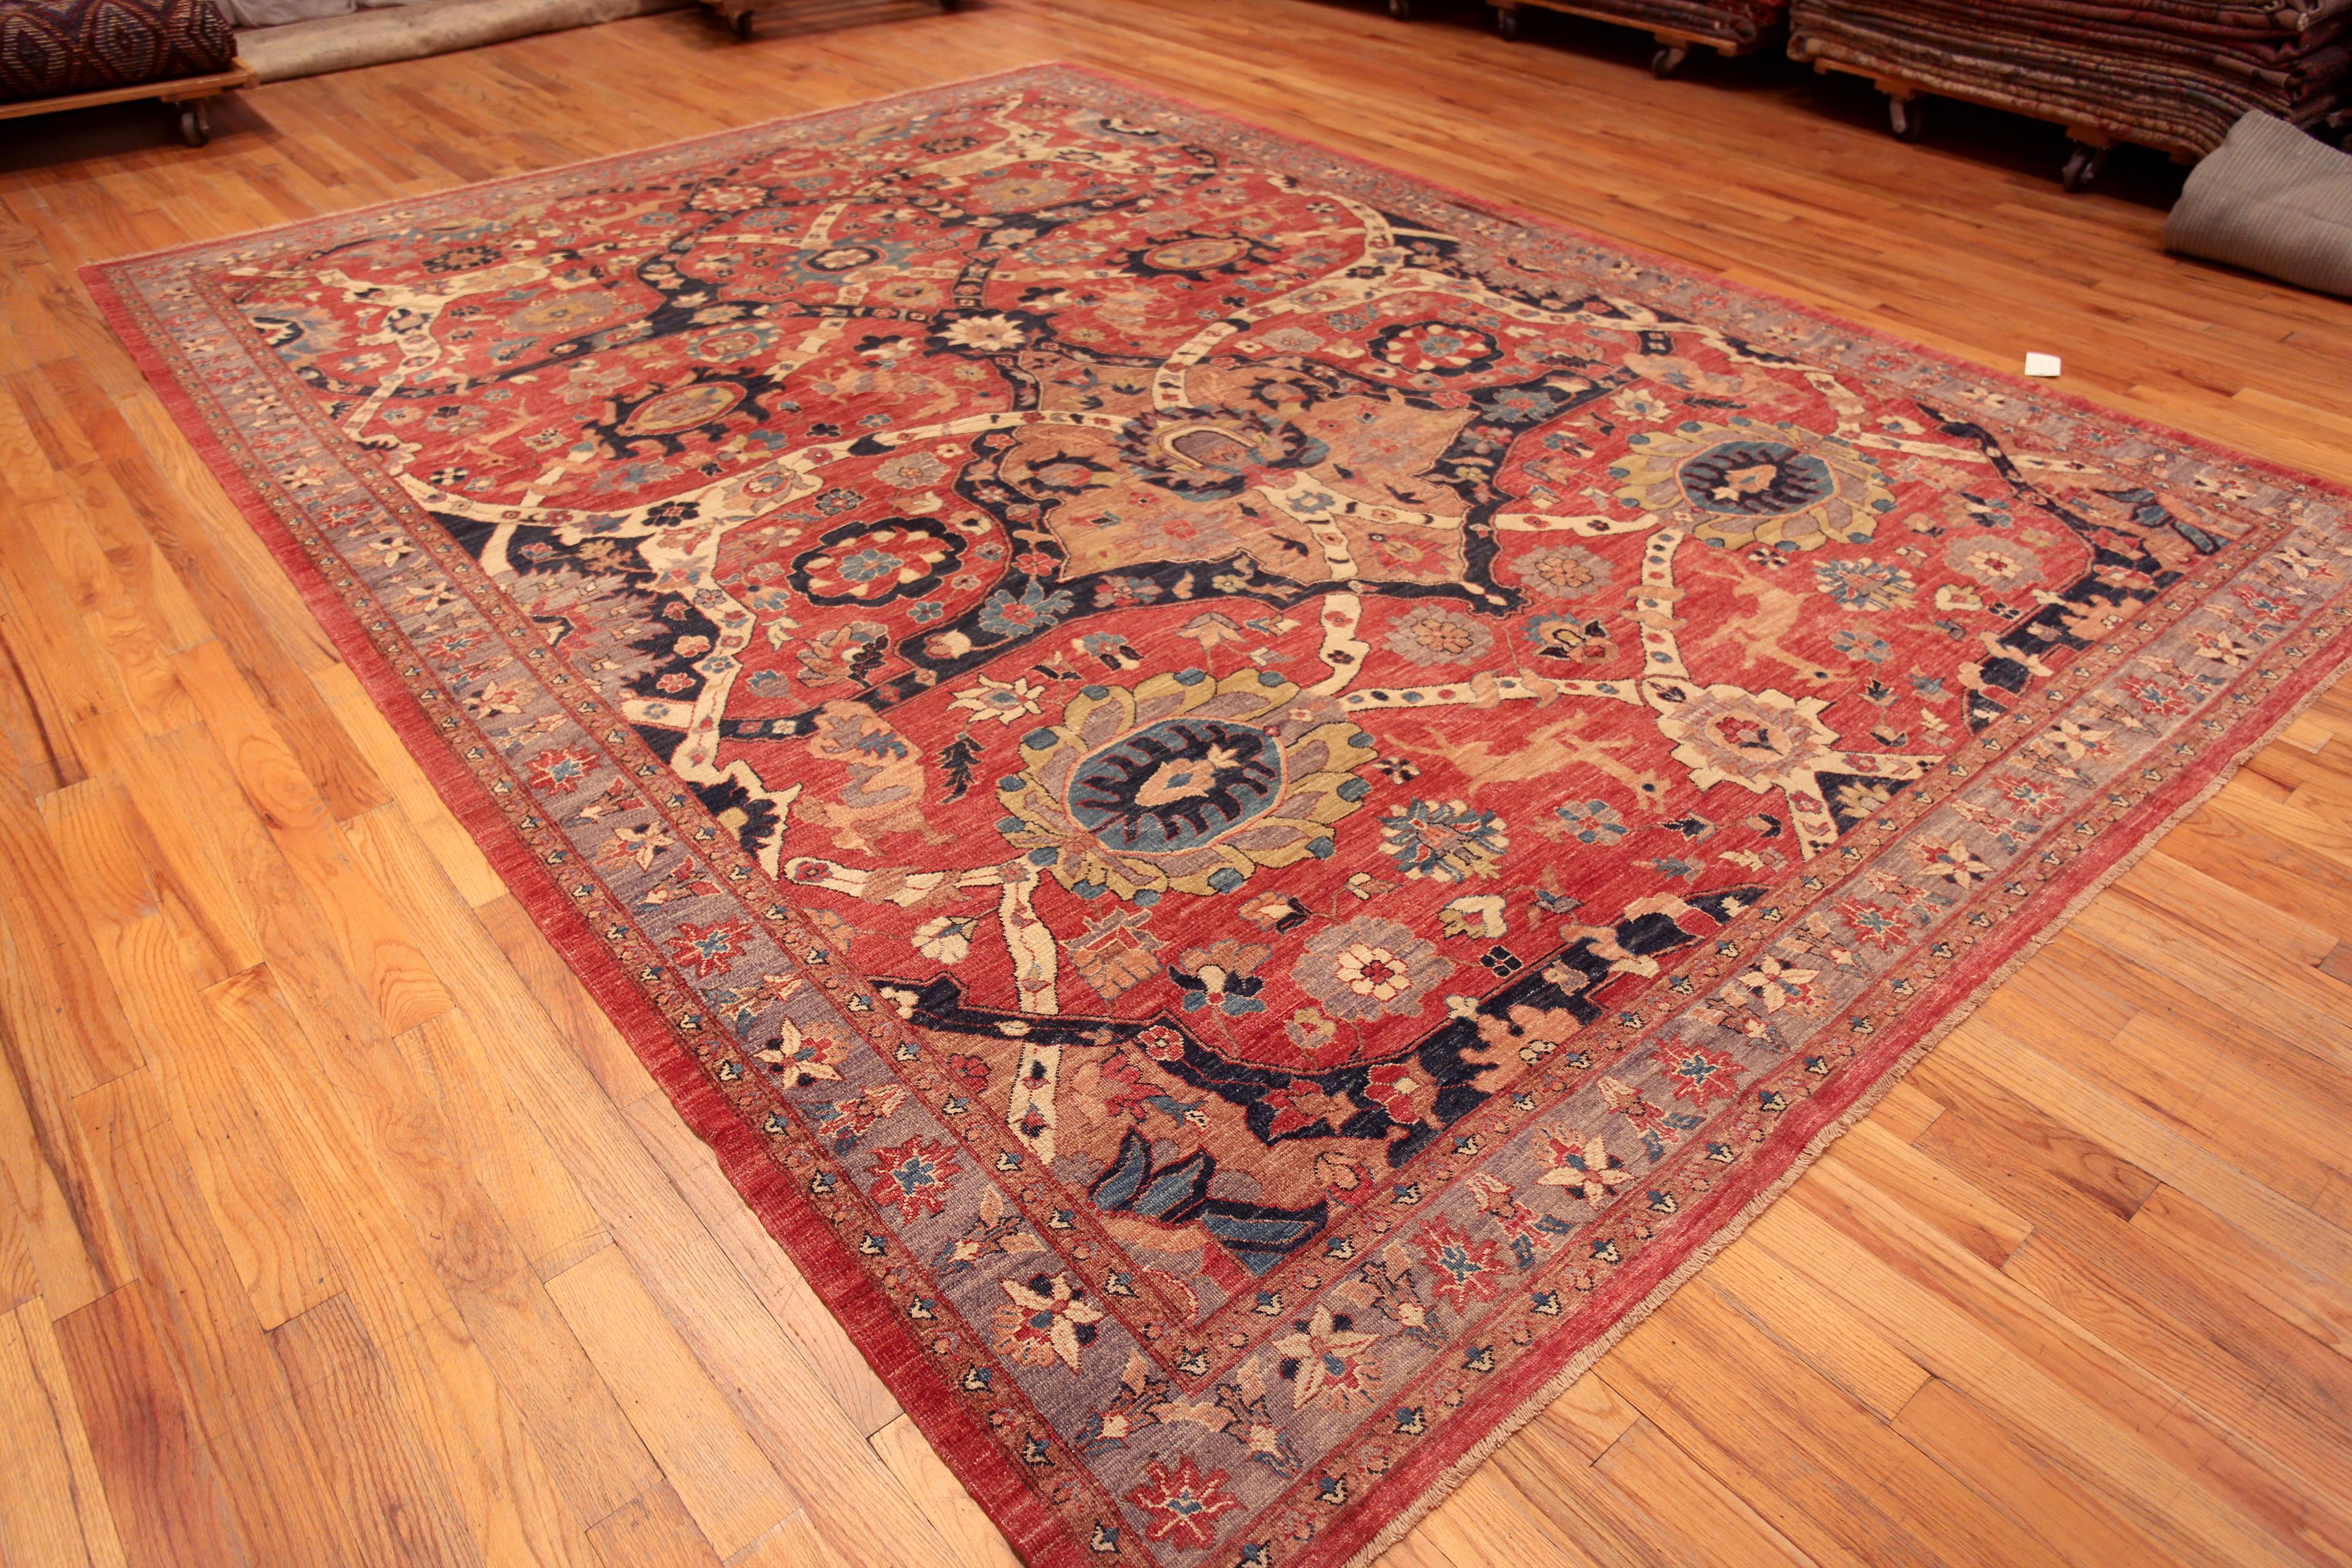 Amazing Contemporary Modern Persian Animal Design Central Asian Oriental Area Rug, Country of Origin: Central Asia, Circa date: Modern Rugs